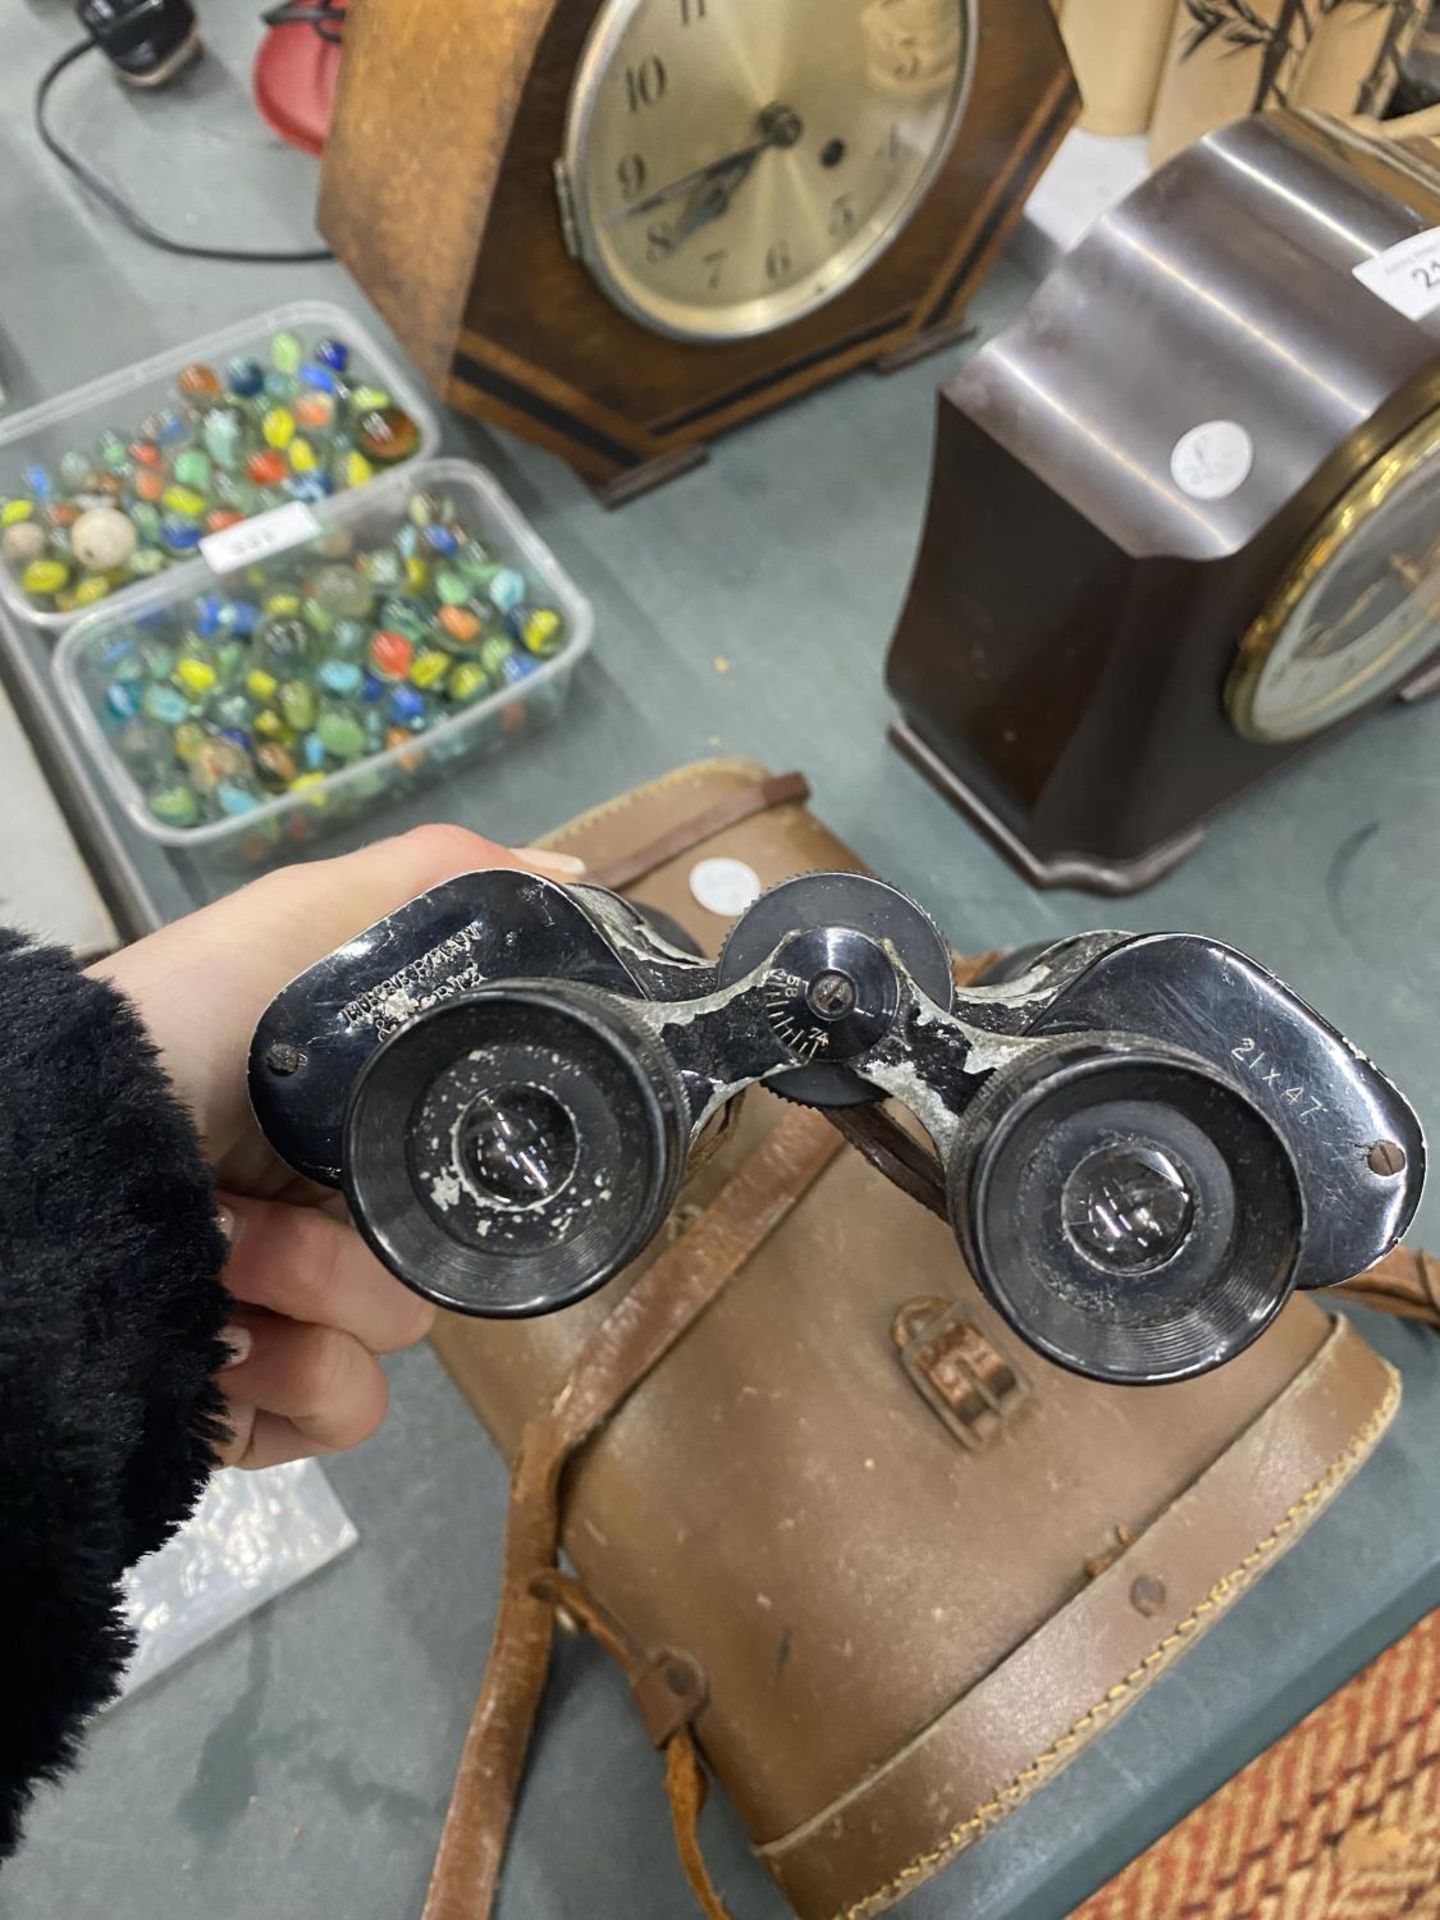 A PAIR OF VINTAGE LIEBERMAN AND GORTZ BINOCULARS IN A CASE - Image 2 of 12